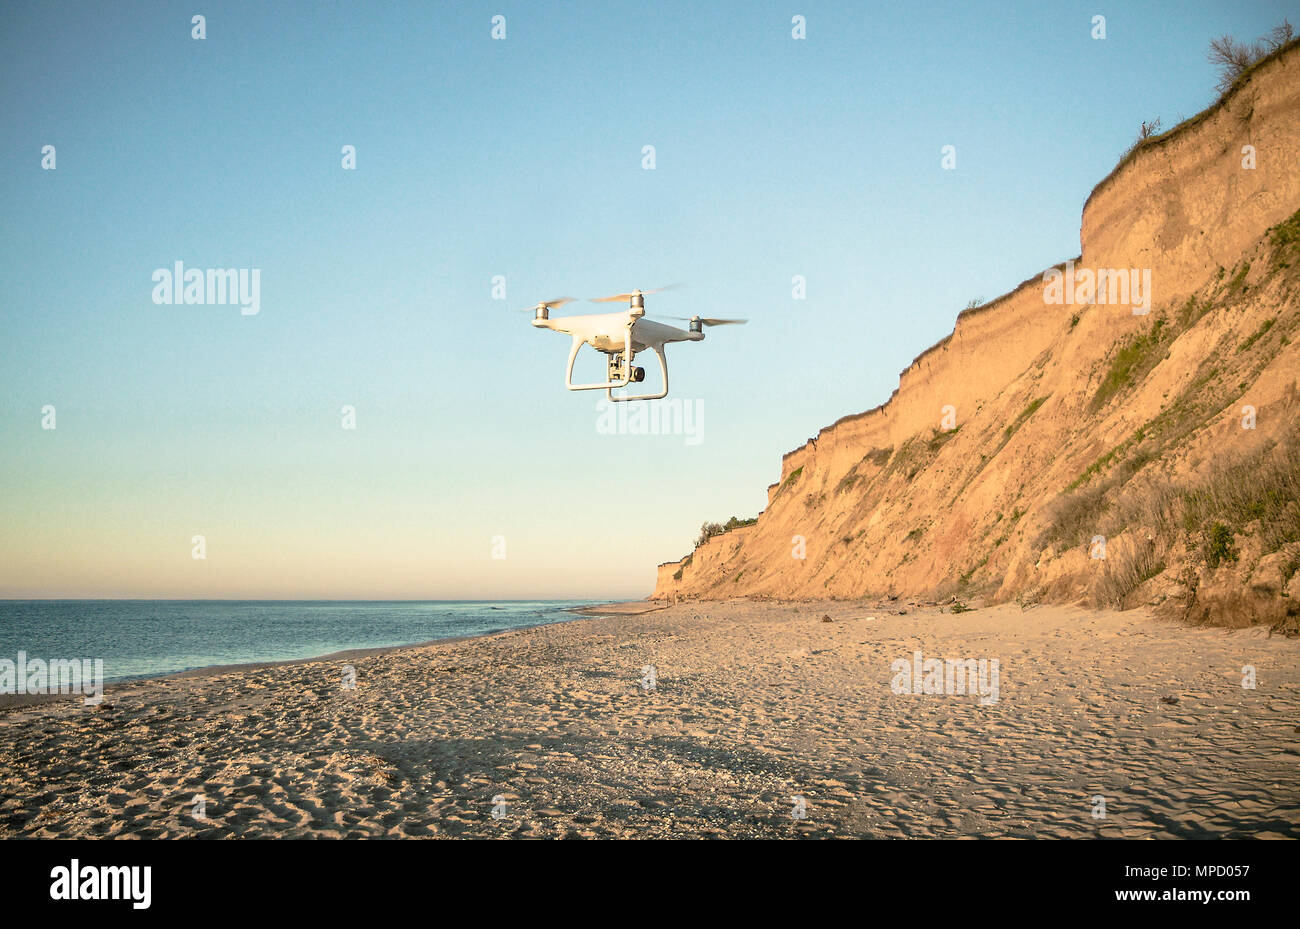 Drone flying over deserted fairy tale beach with golden sand and blue water on the shores of ocean. Romantic place near the sea. Cloudy day. Stock Photo